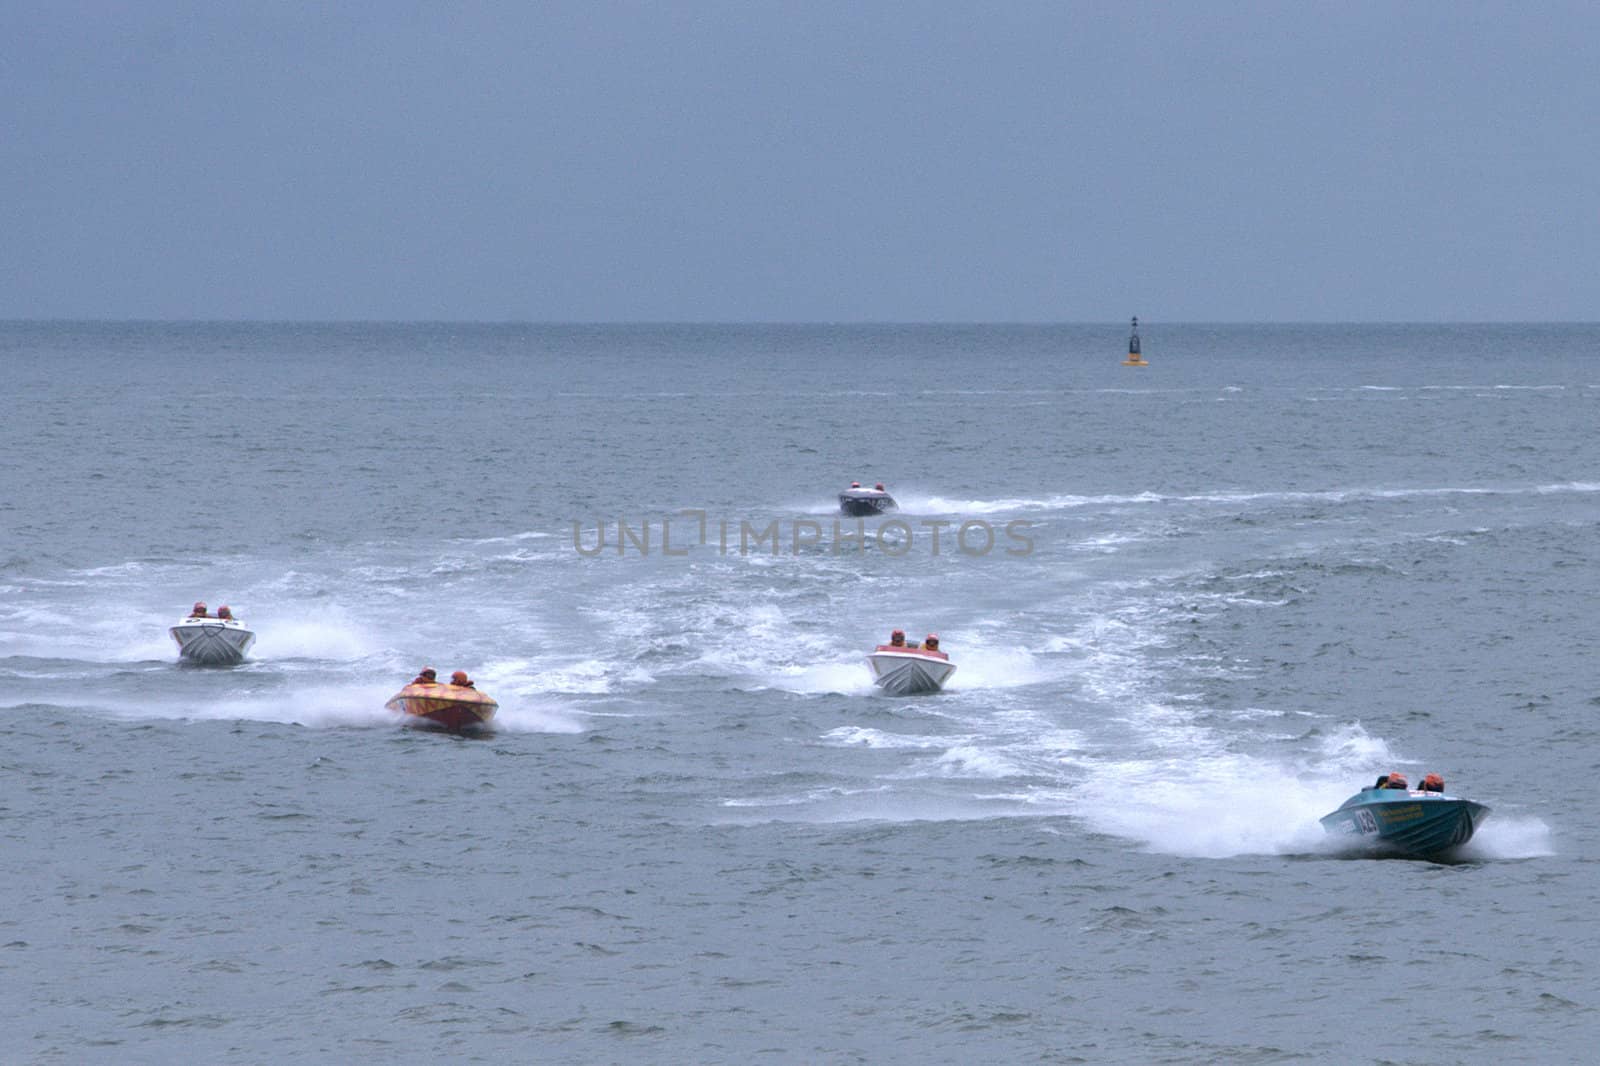 Group of power boats racing